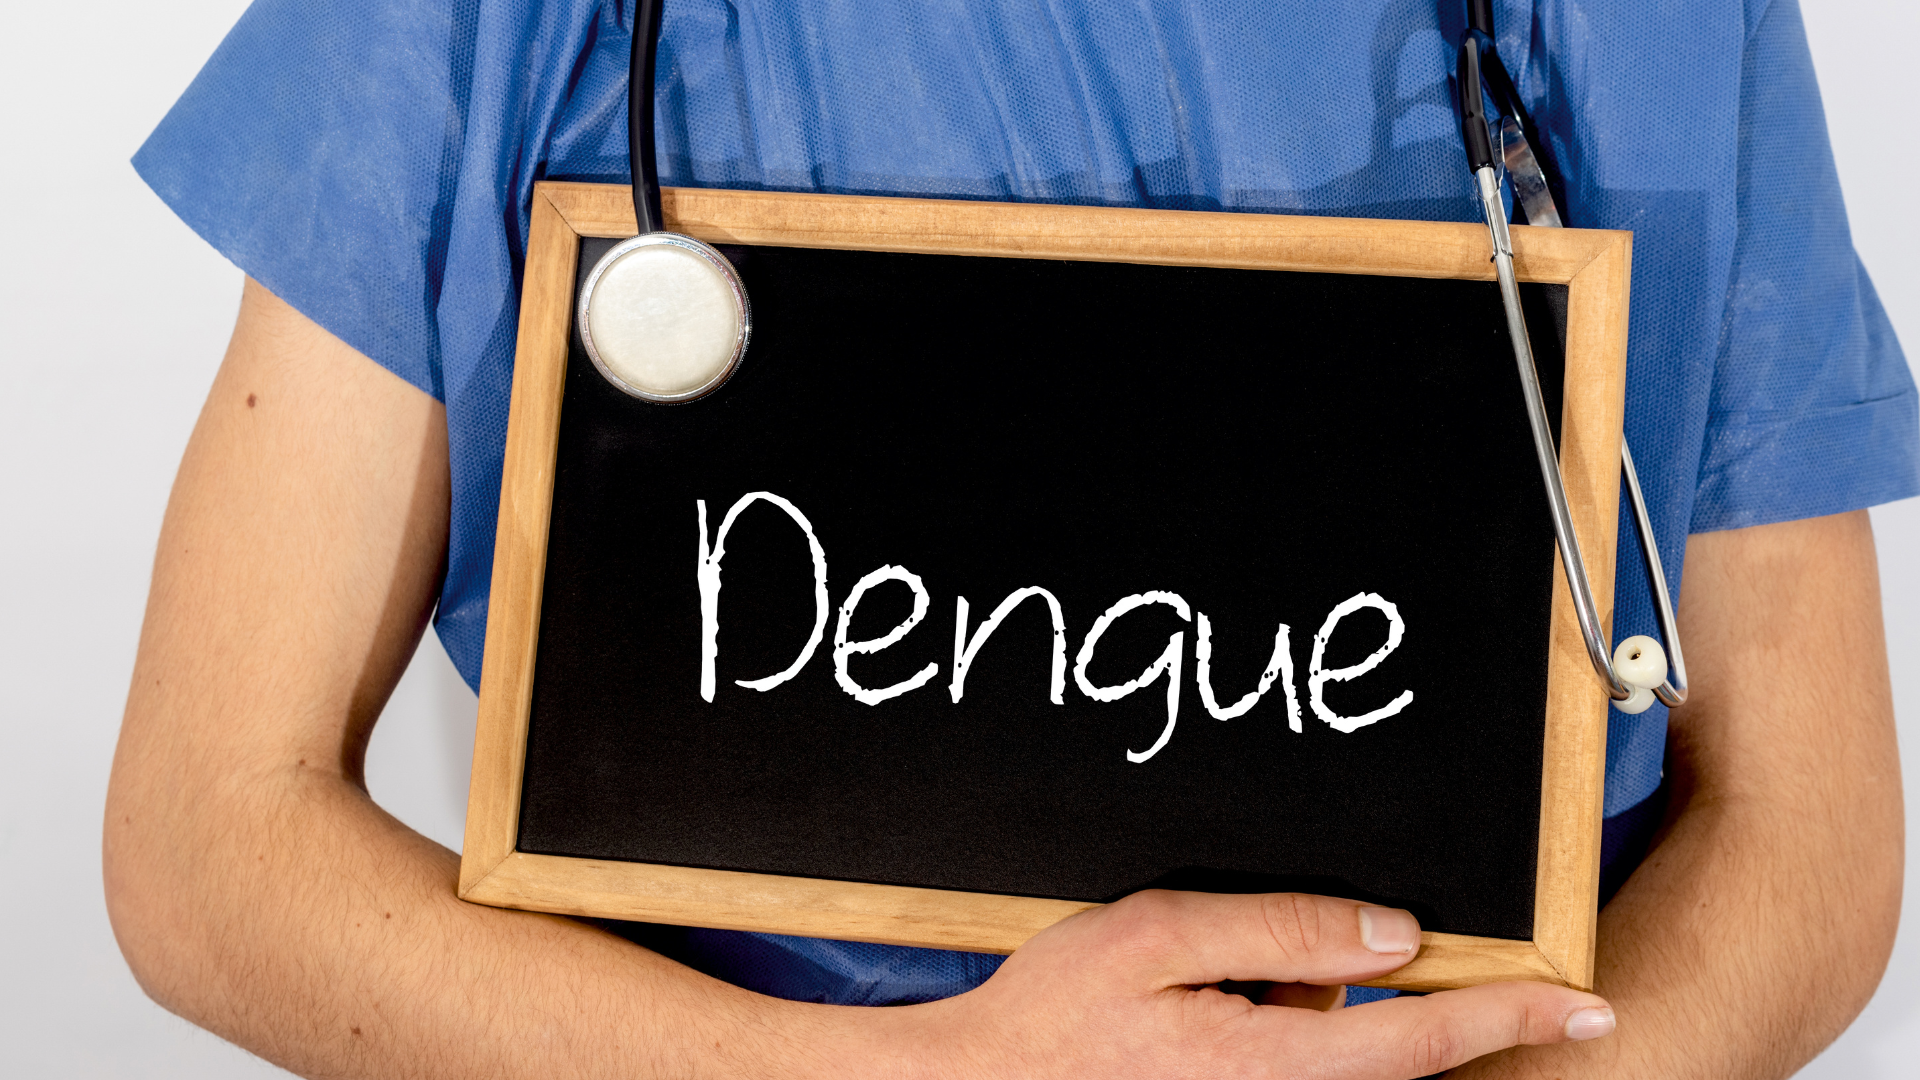 How to protect yourself from dengue fever?